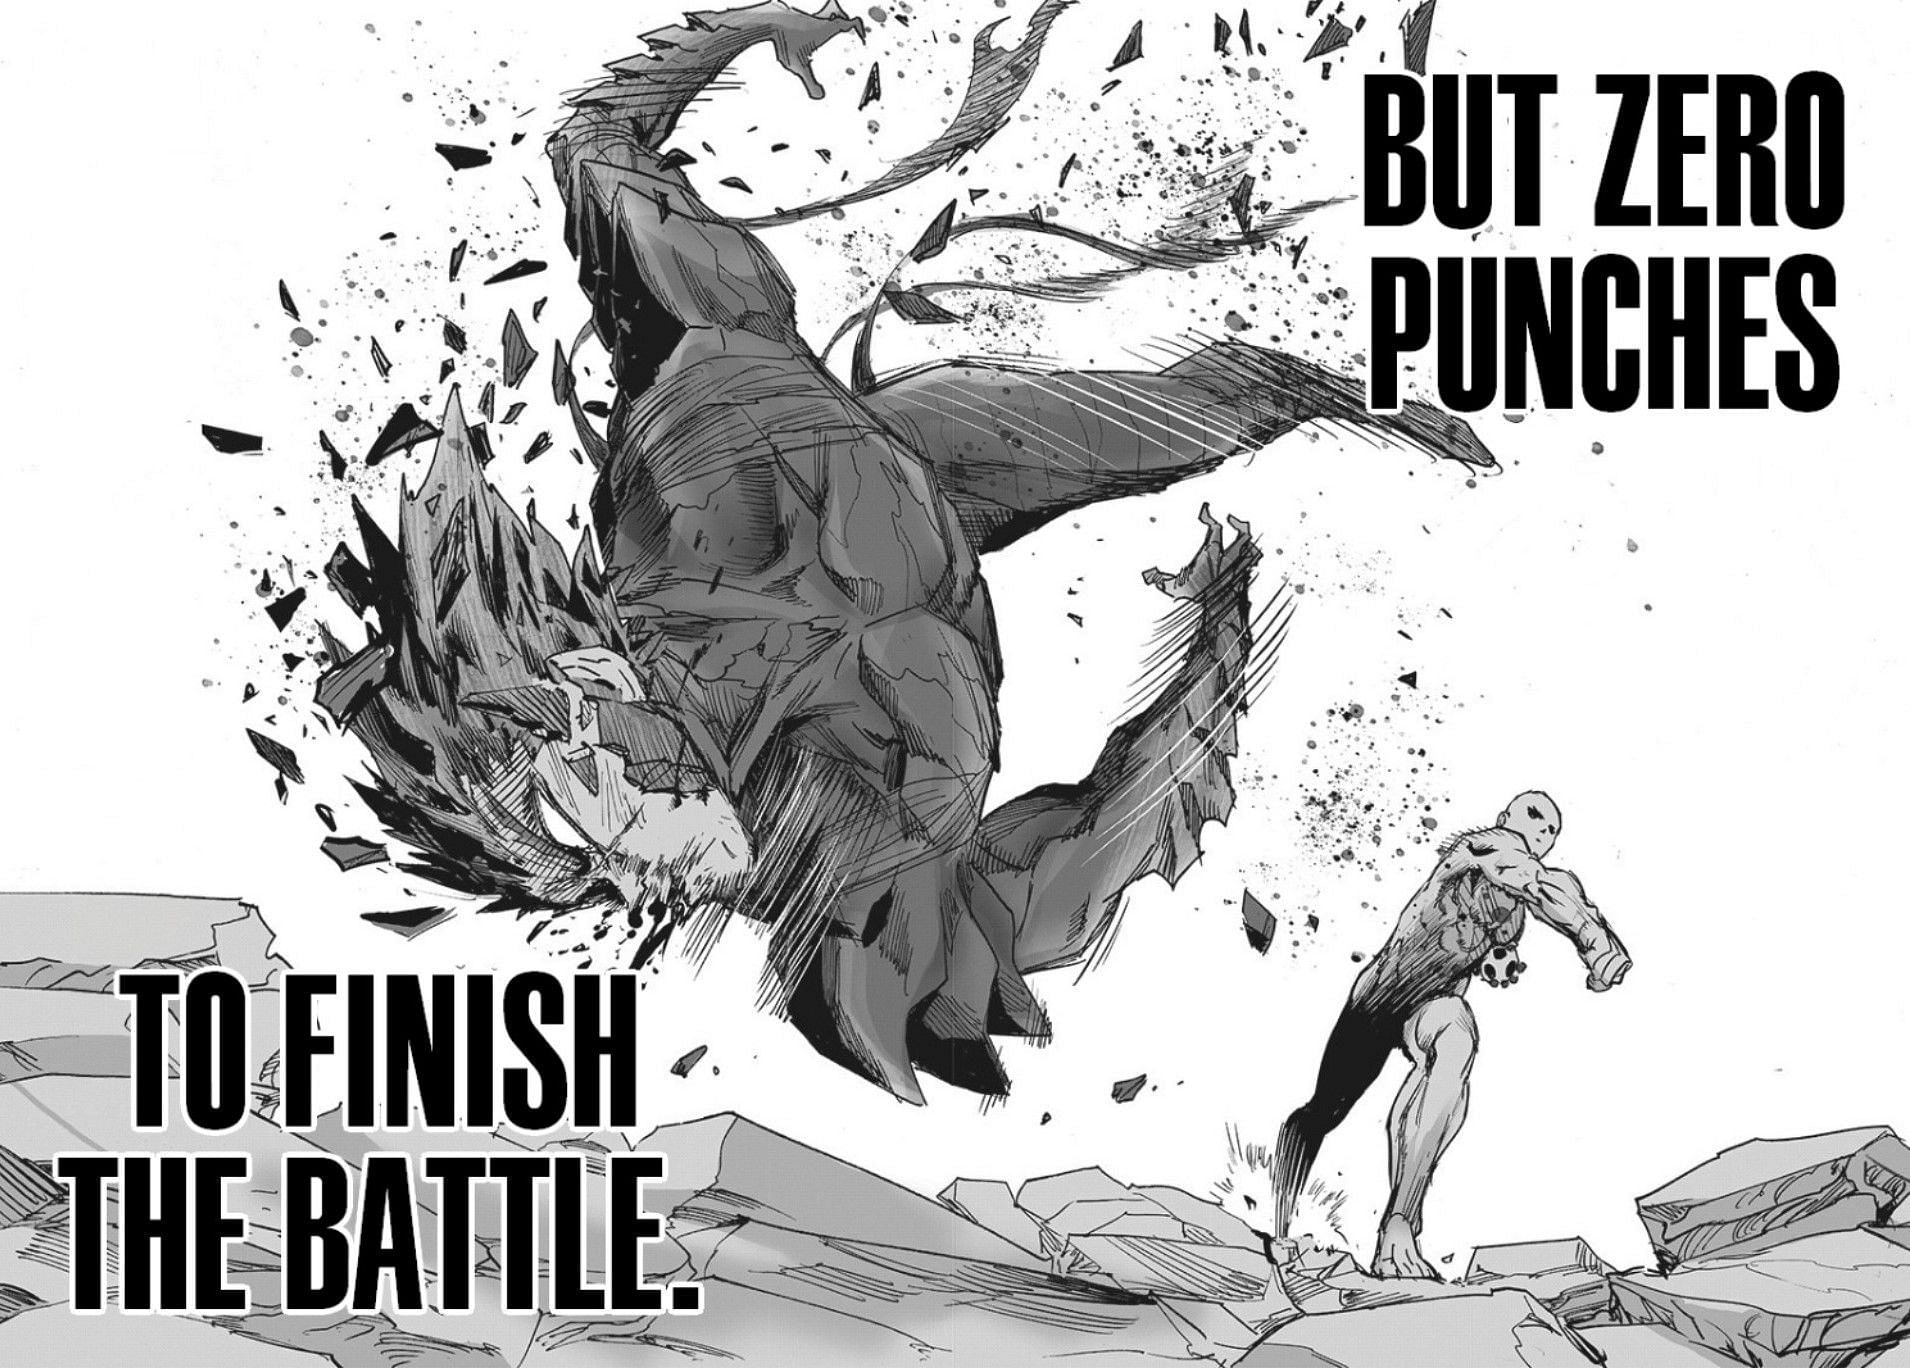 Fans react to the latest chapter of the series (Image via ONE/Yusuke Murata, Shueisha, One Punch Man)